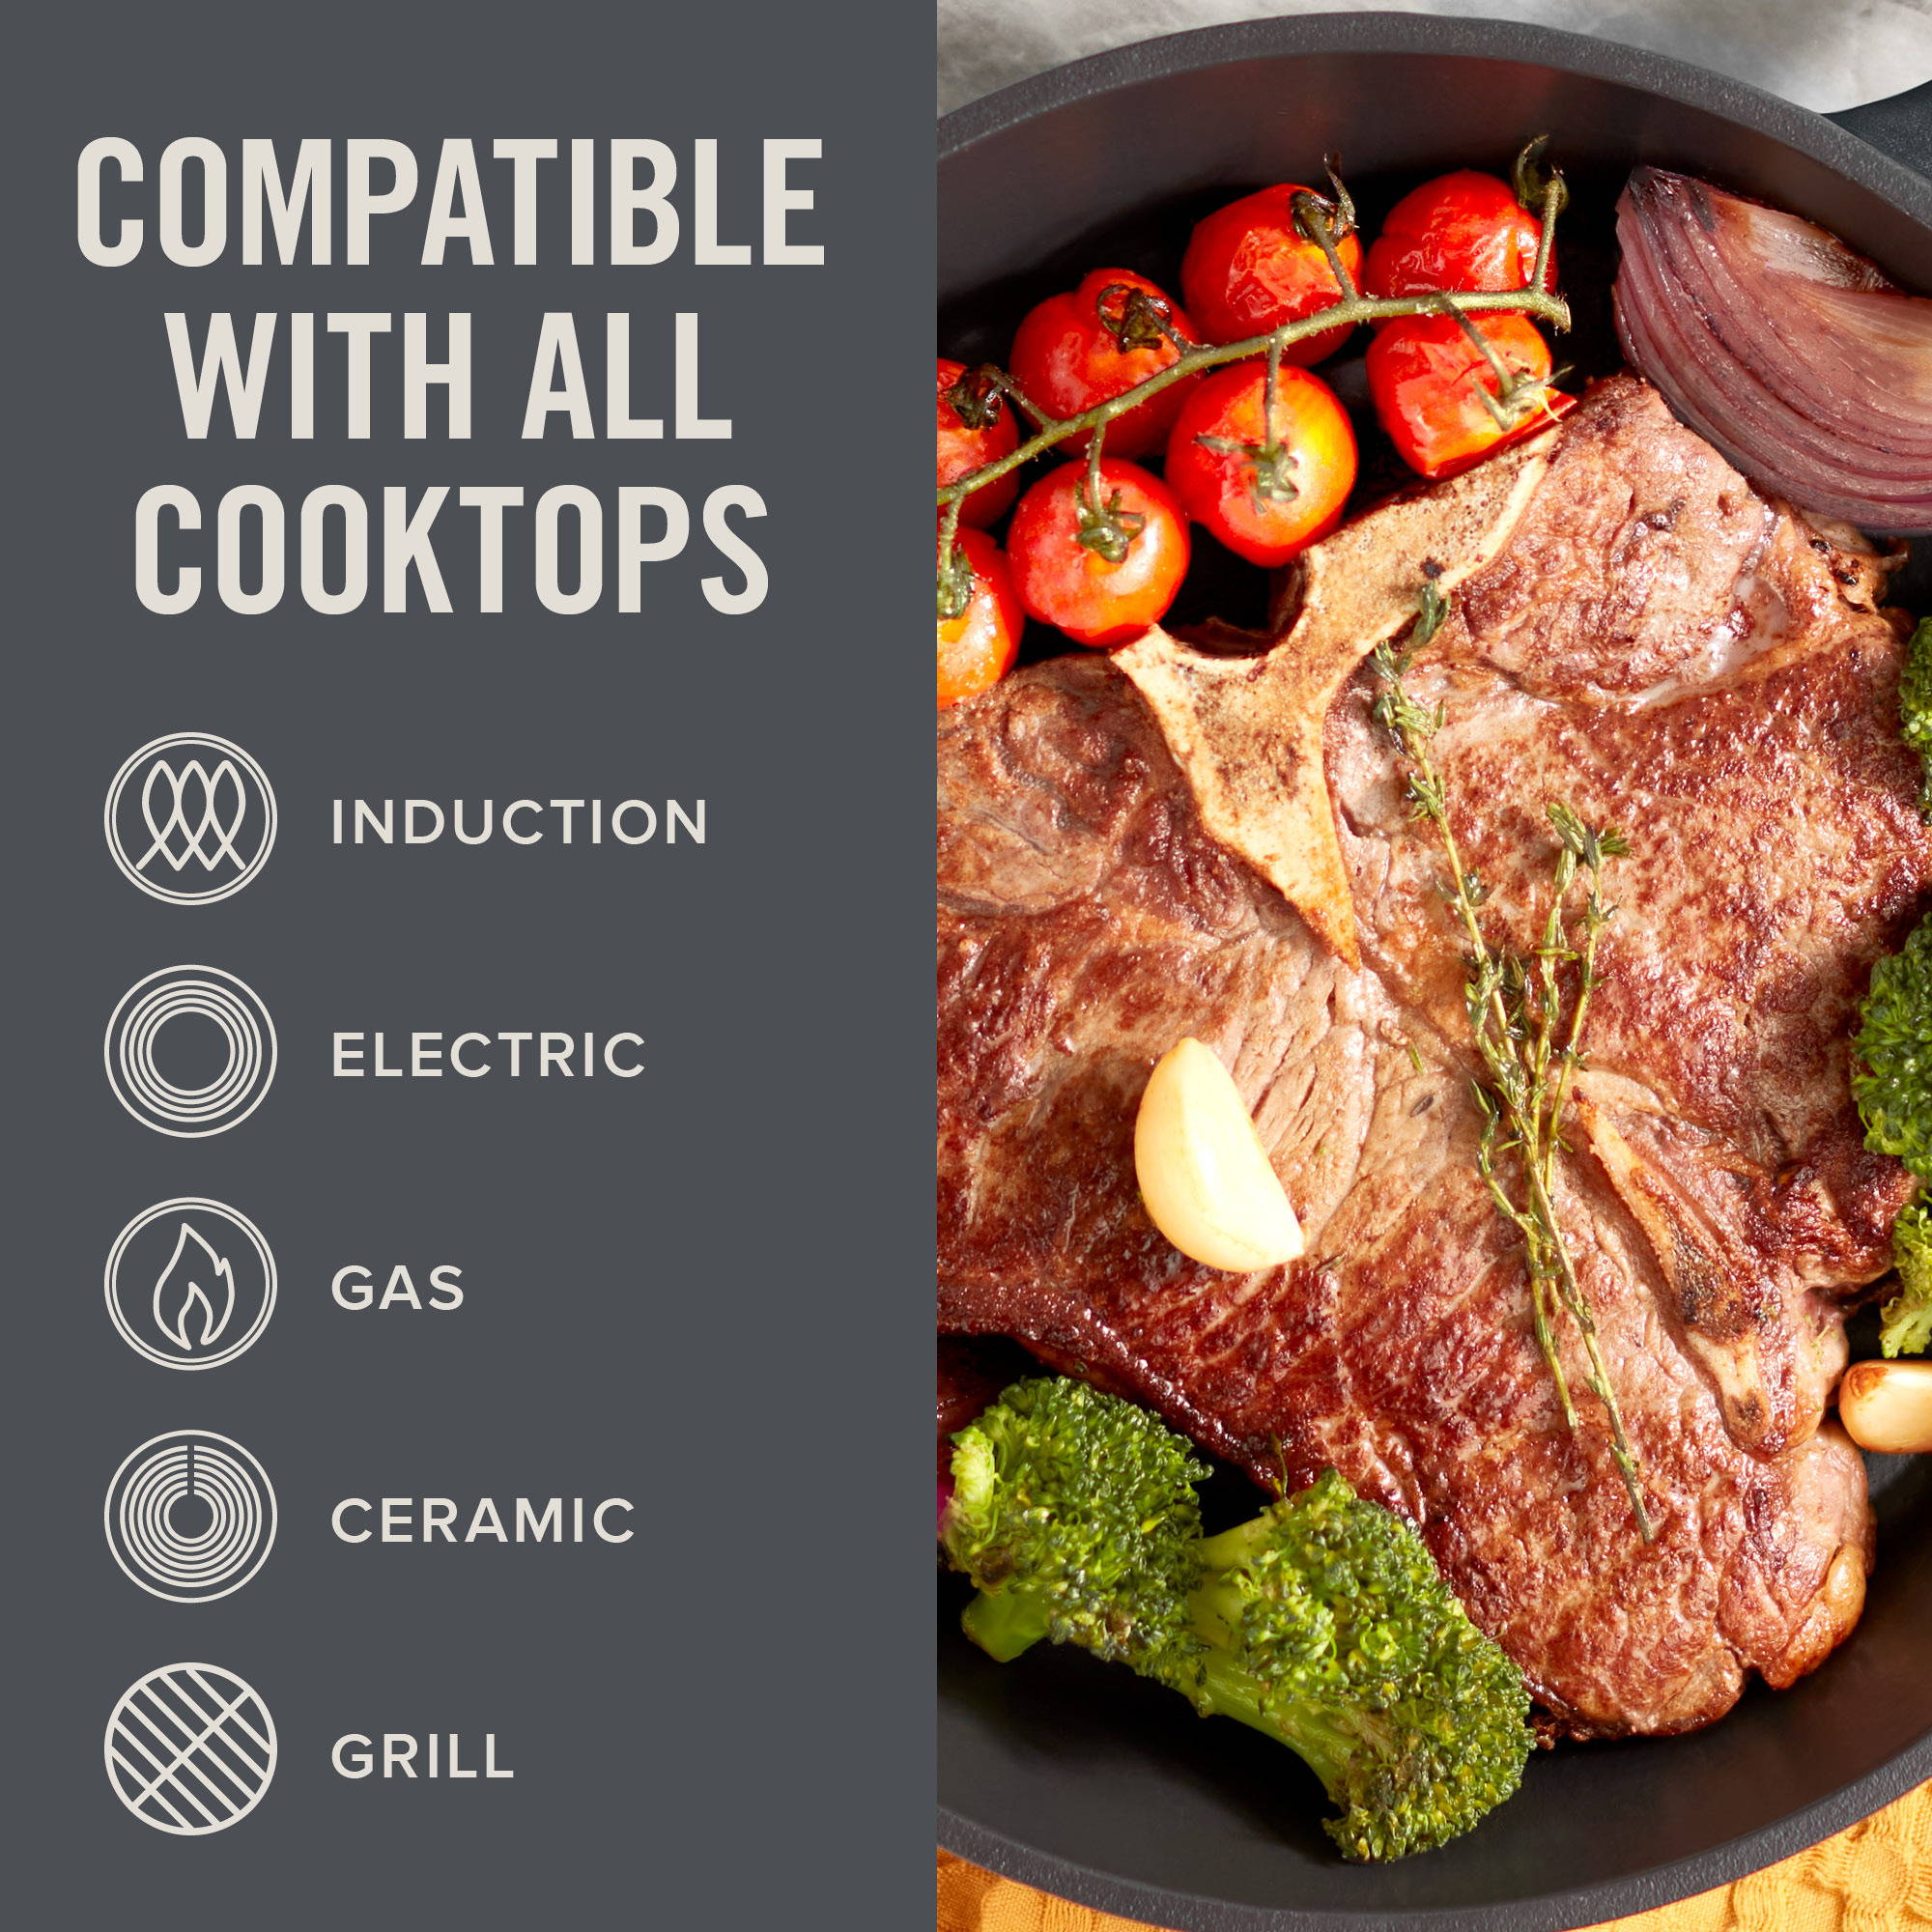 Compatible with all cooktops, induction, electric, gas, ceramic, and grill.